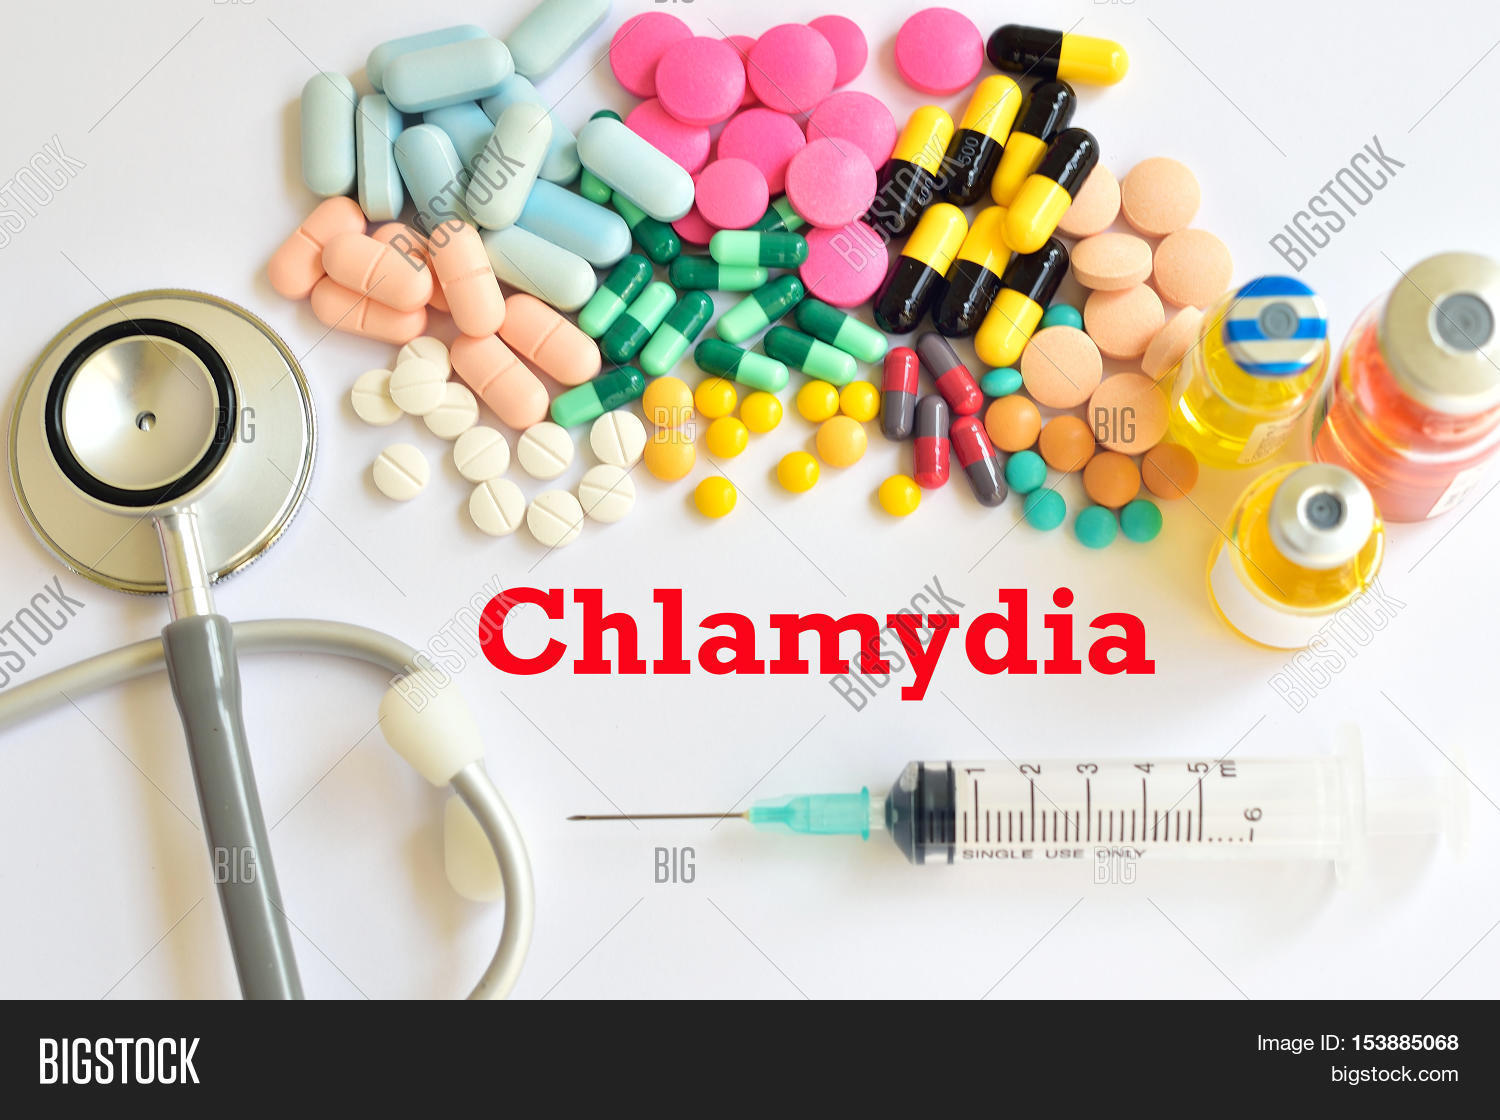 Where can you get free chlamydia treatment  Health News